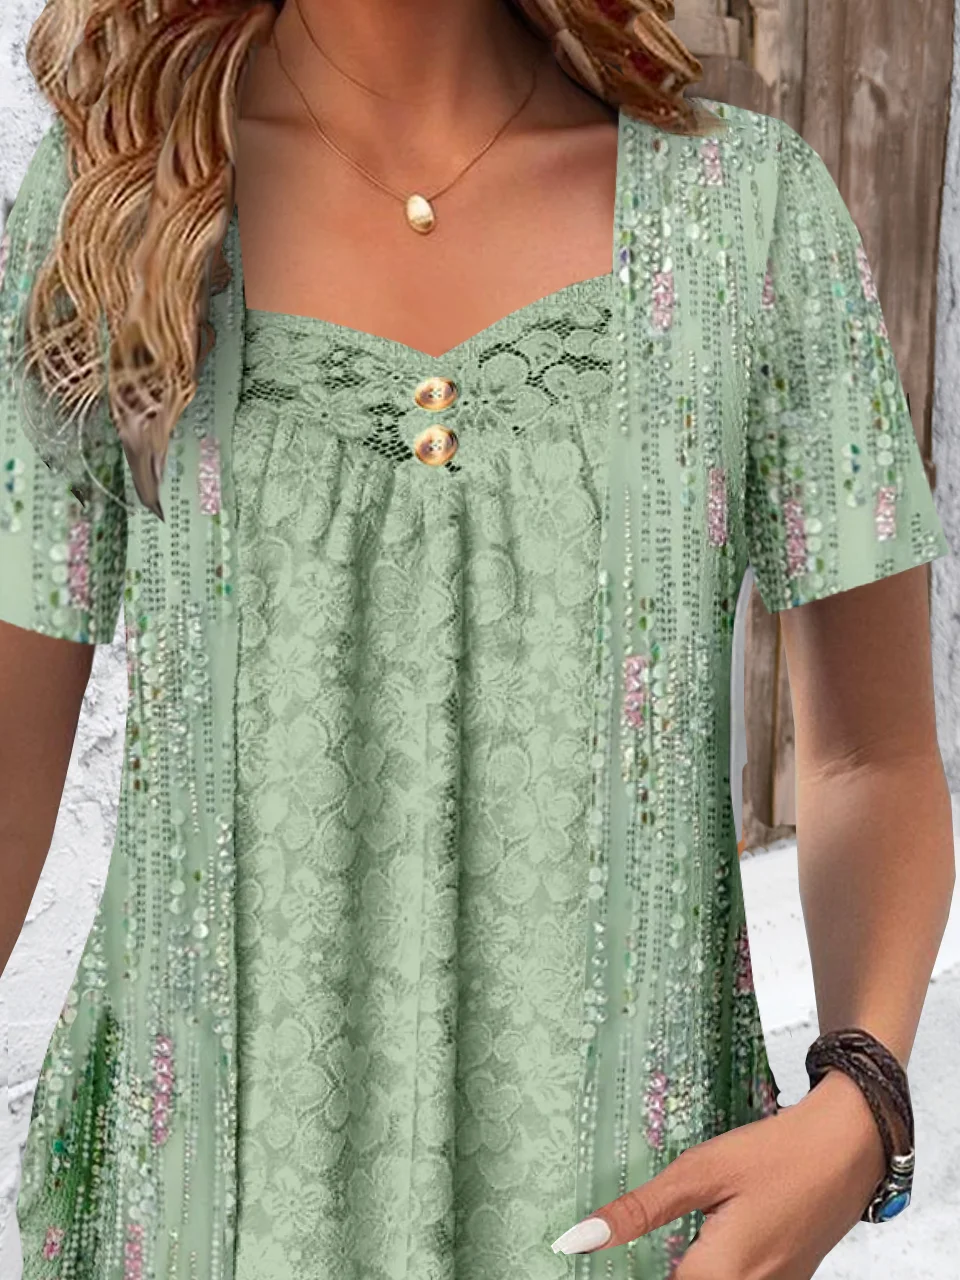 Short Sleeve Disty Floral Lace Regular Loose Shirt For Women